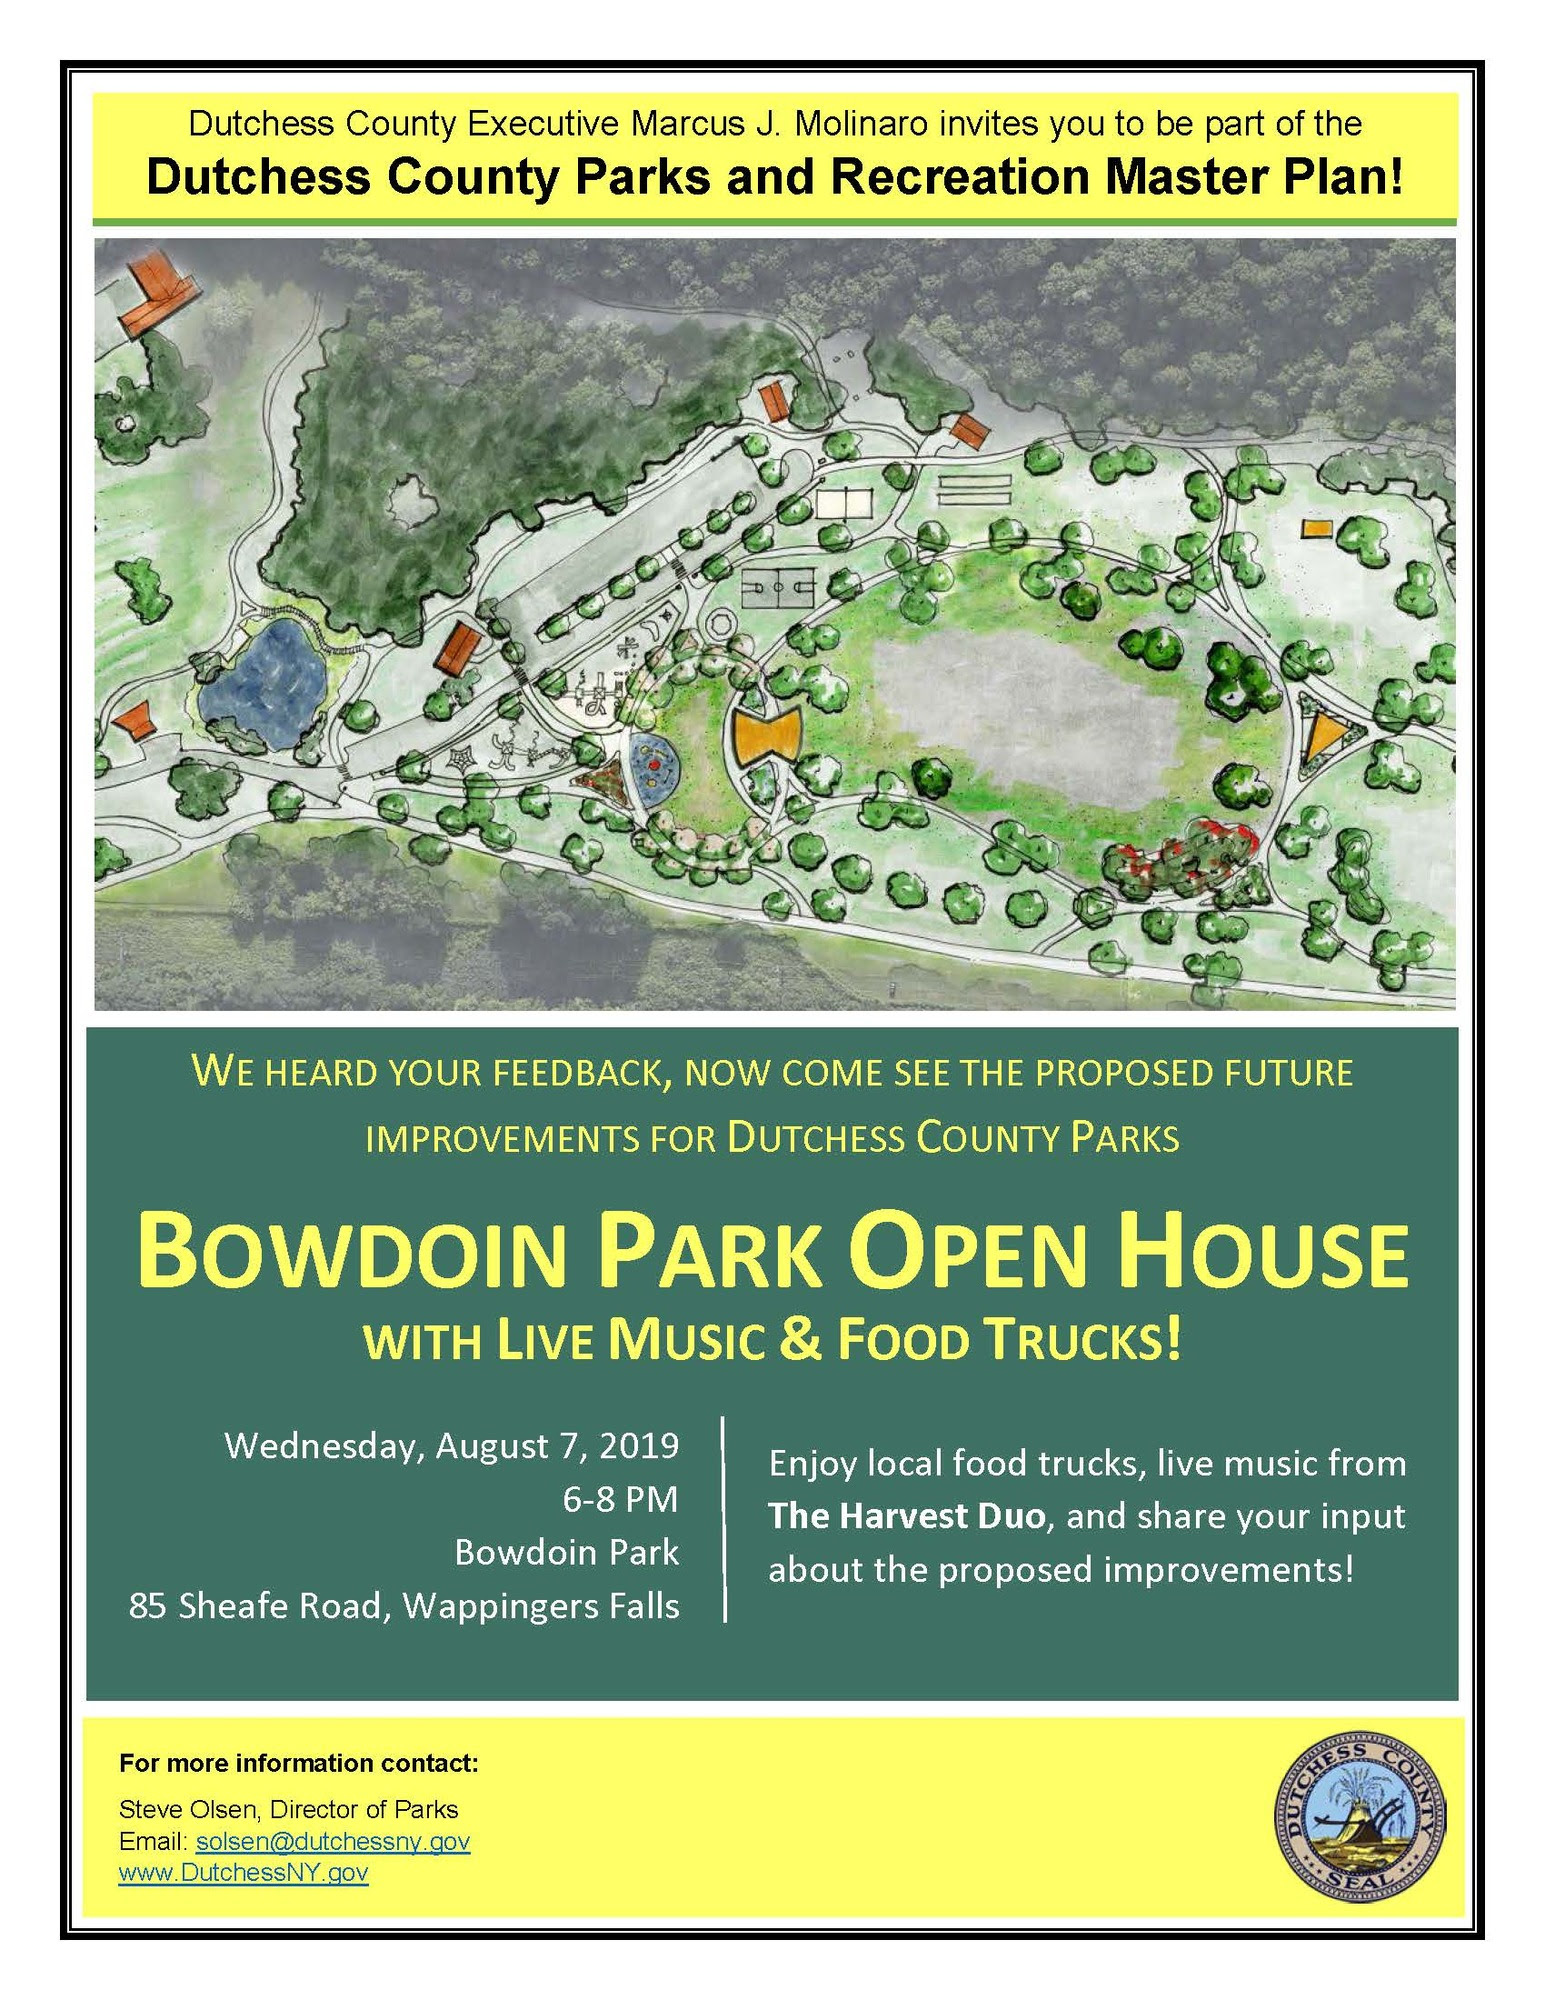 Parks Outreach Event at Bowdoin Park to Include Live Music & Food Trucks The Harlem Valley News